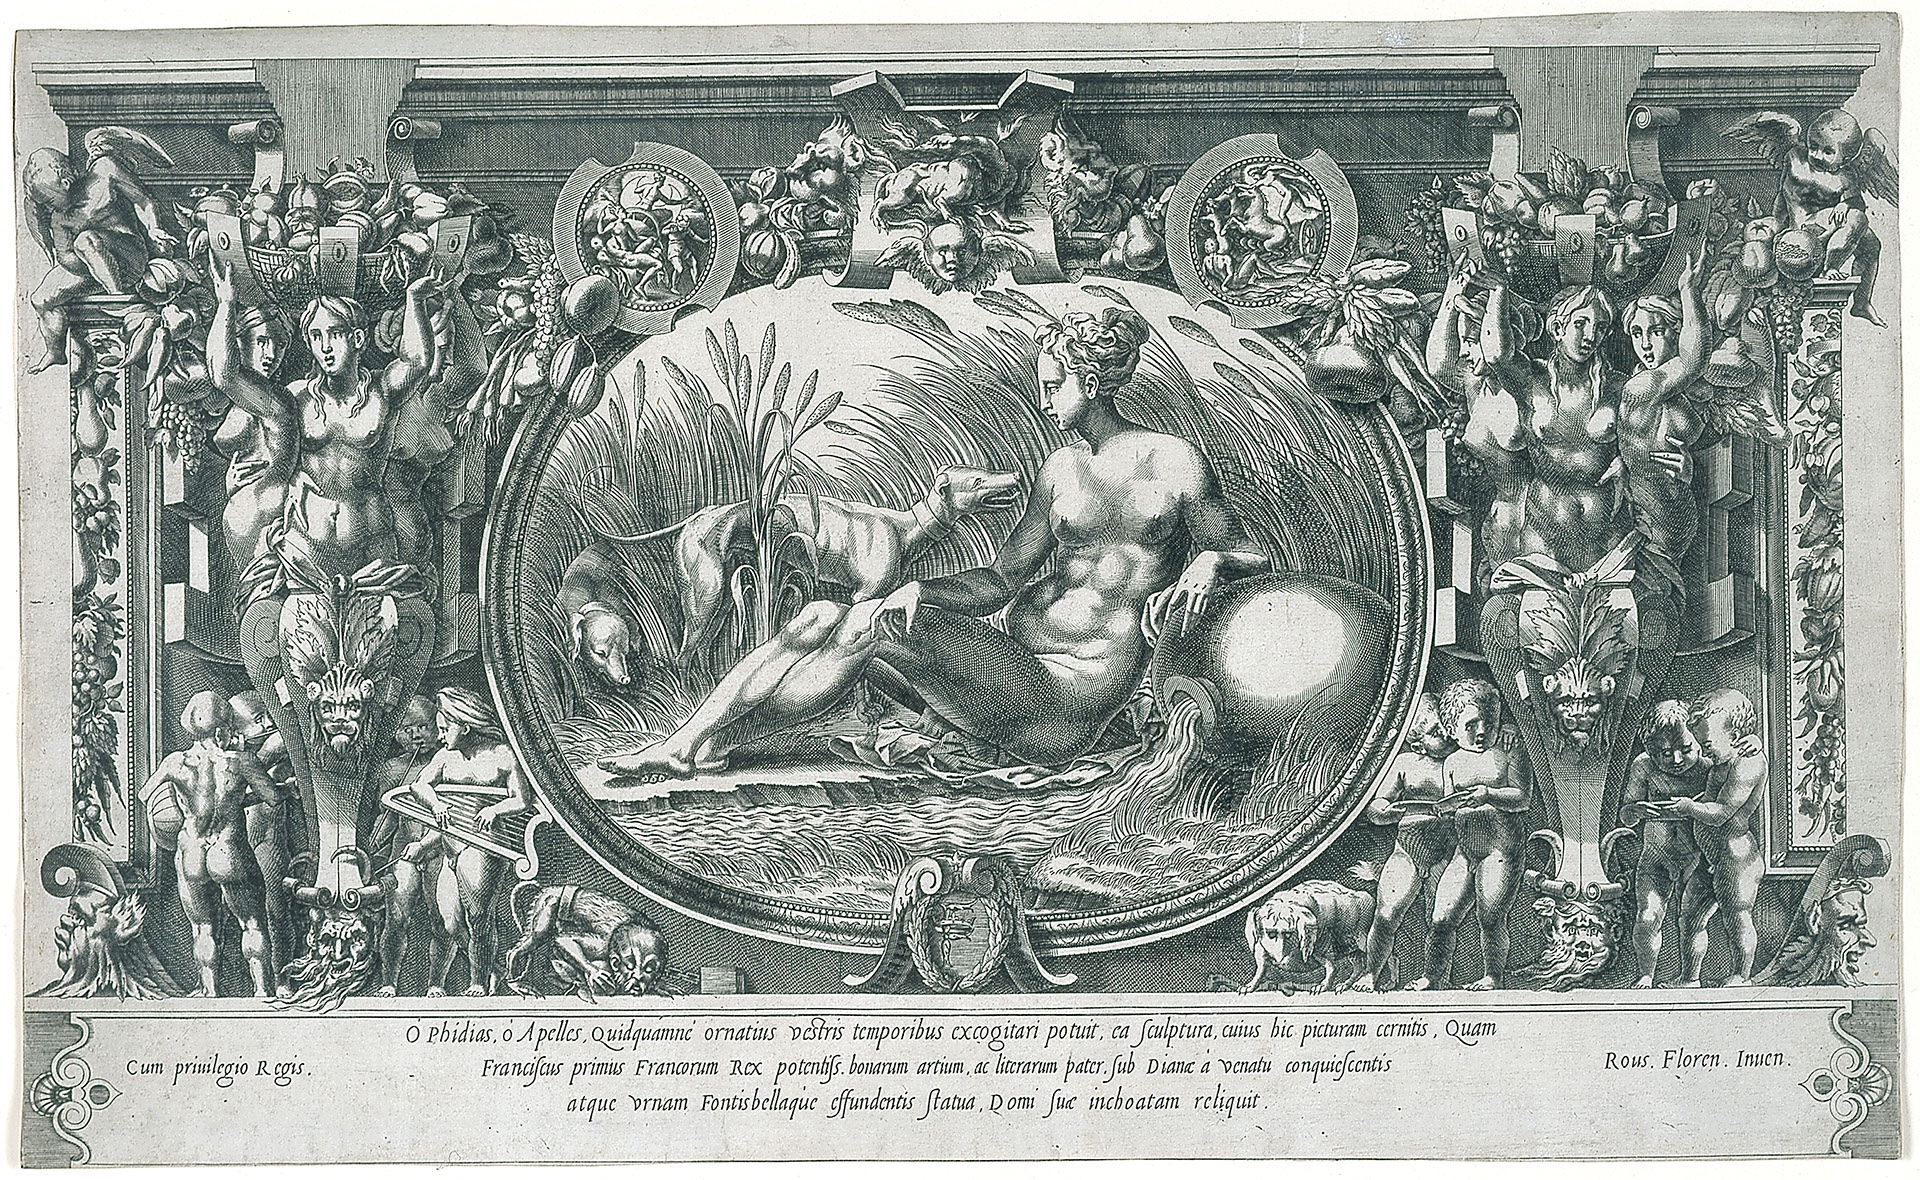 Elaborate ornamental framesurrounding an oval image of a woman and two dogs